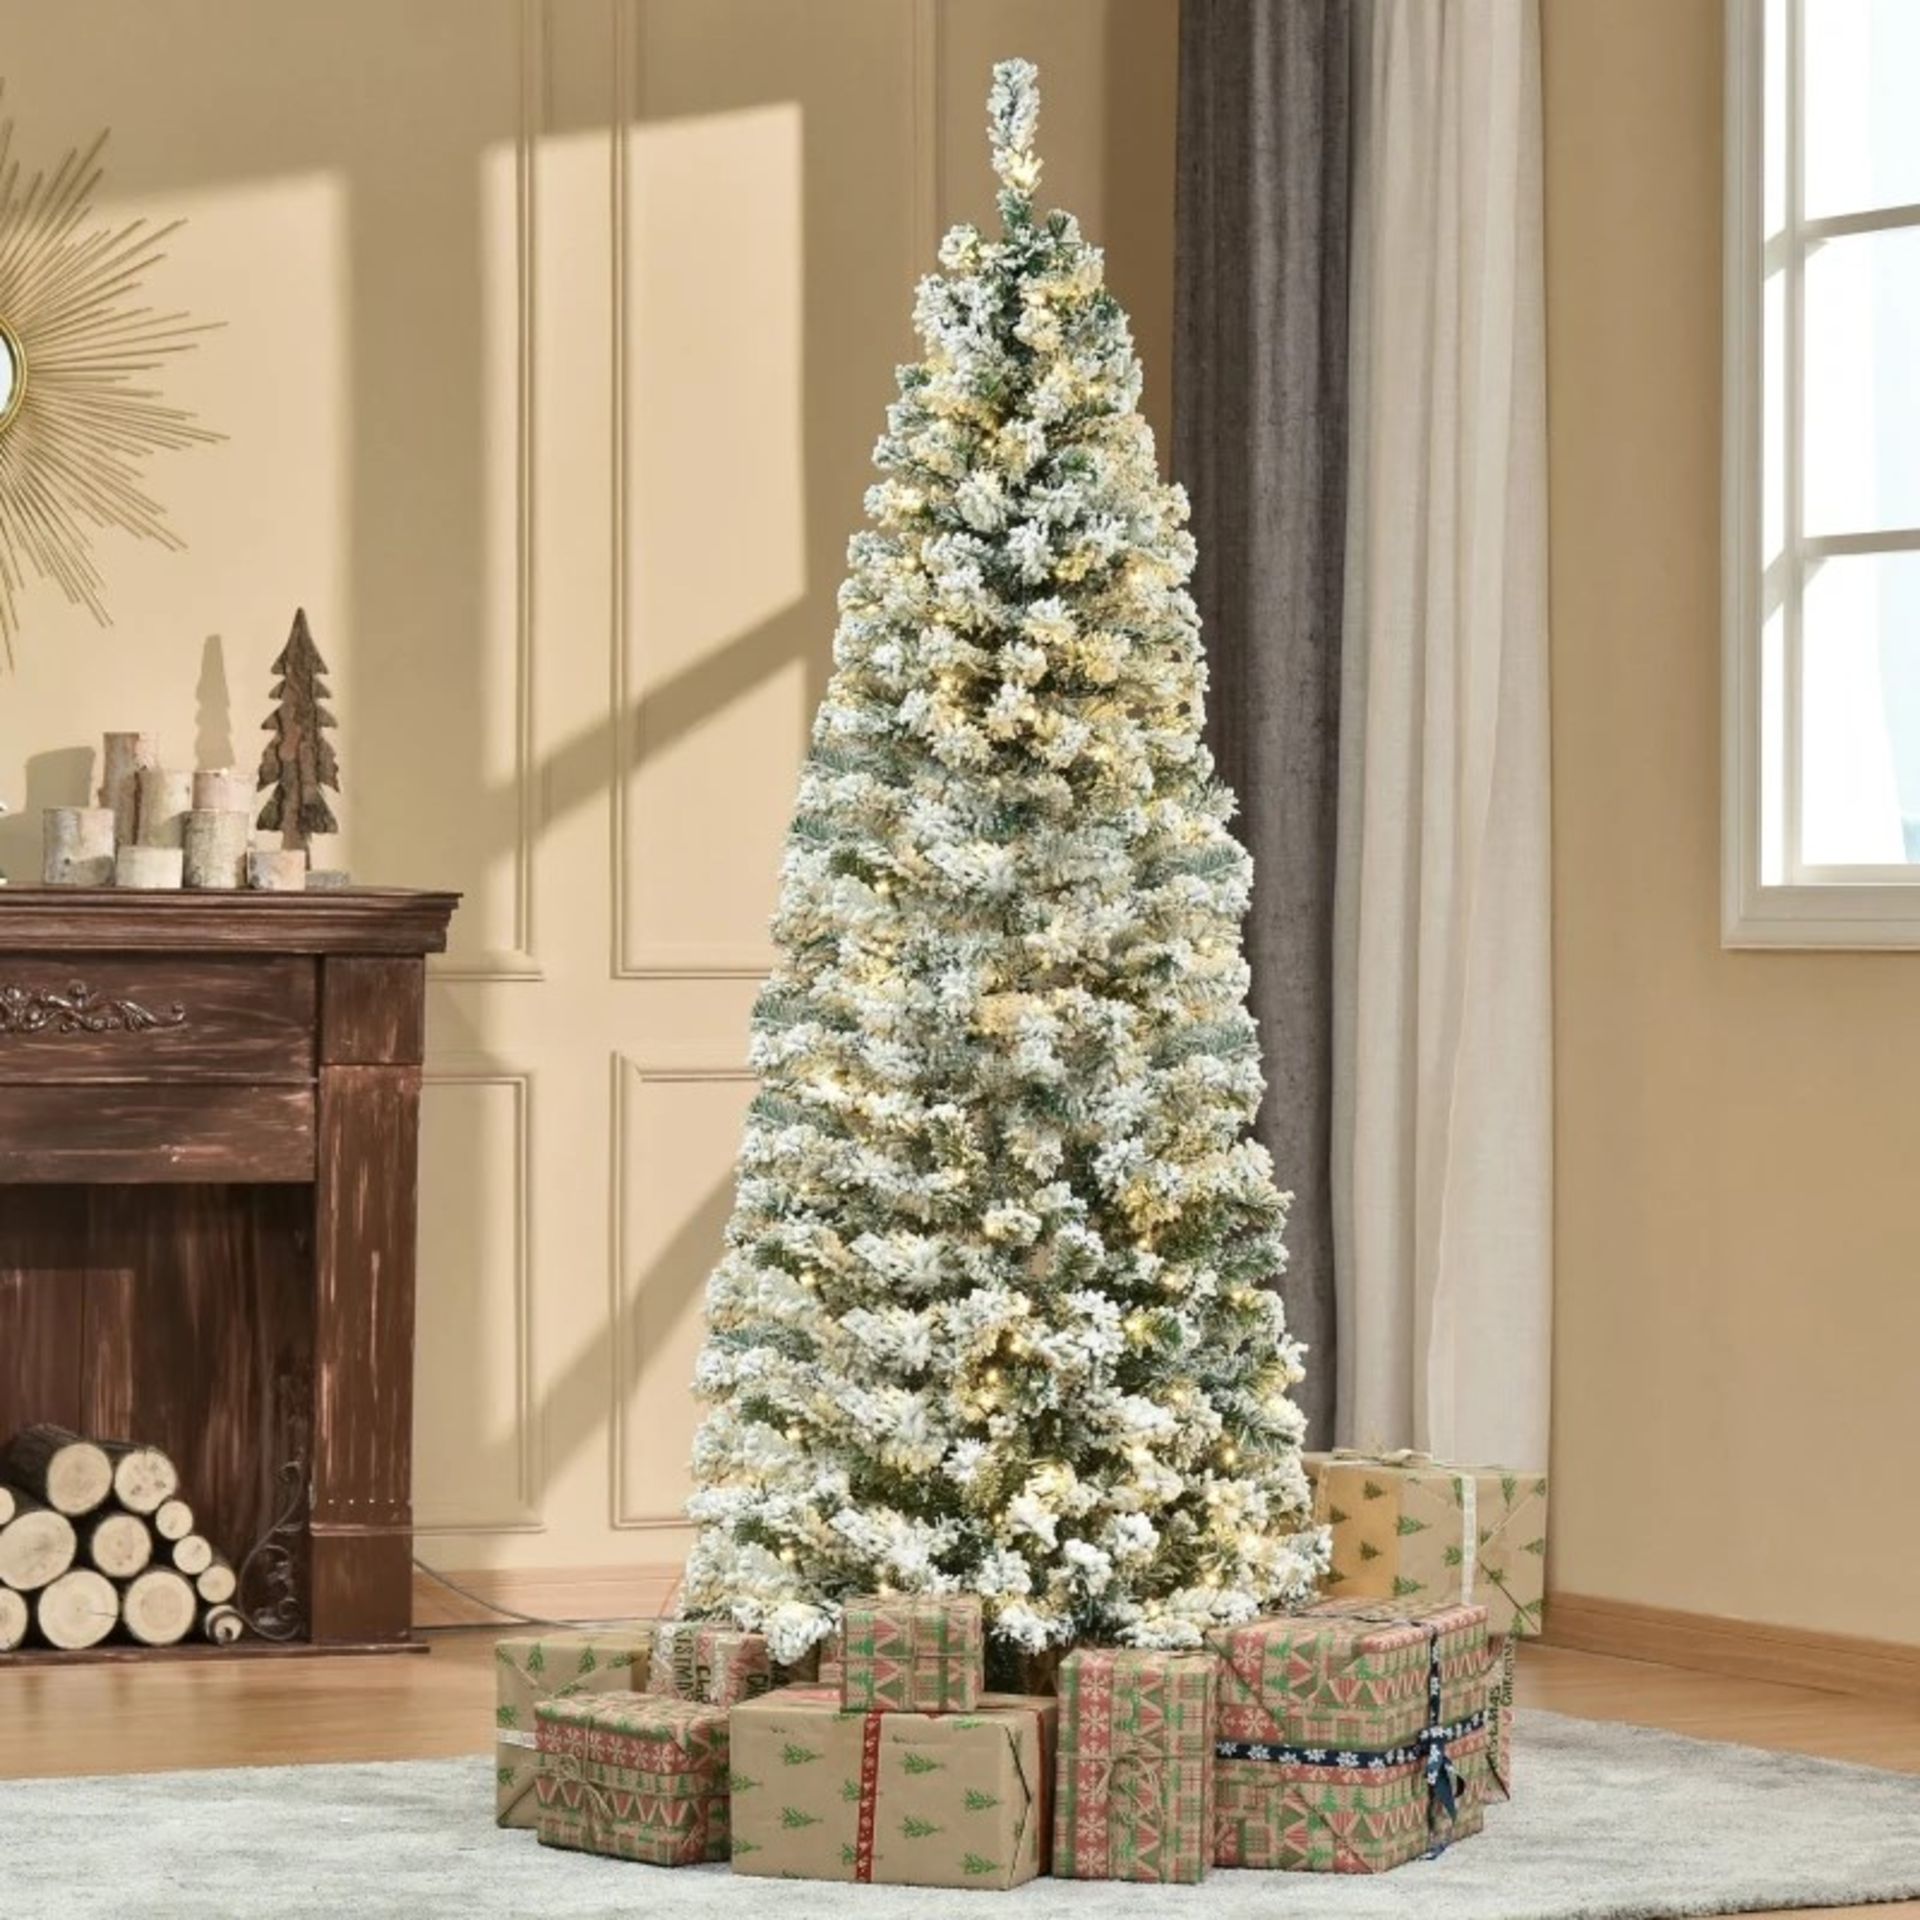 RRP £99.99 - HOMCOM 6FT Prelit Artificial Snow Flocked Christmas Tree with Warm White LED Light,